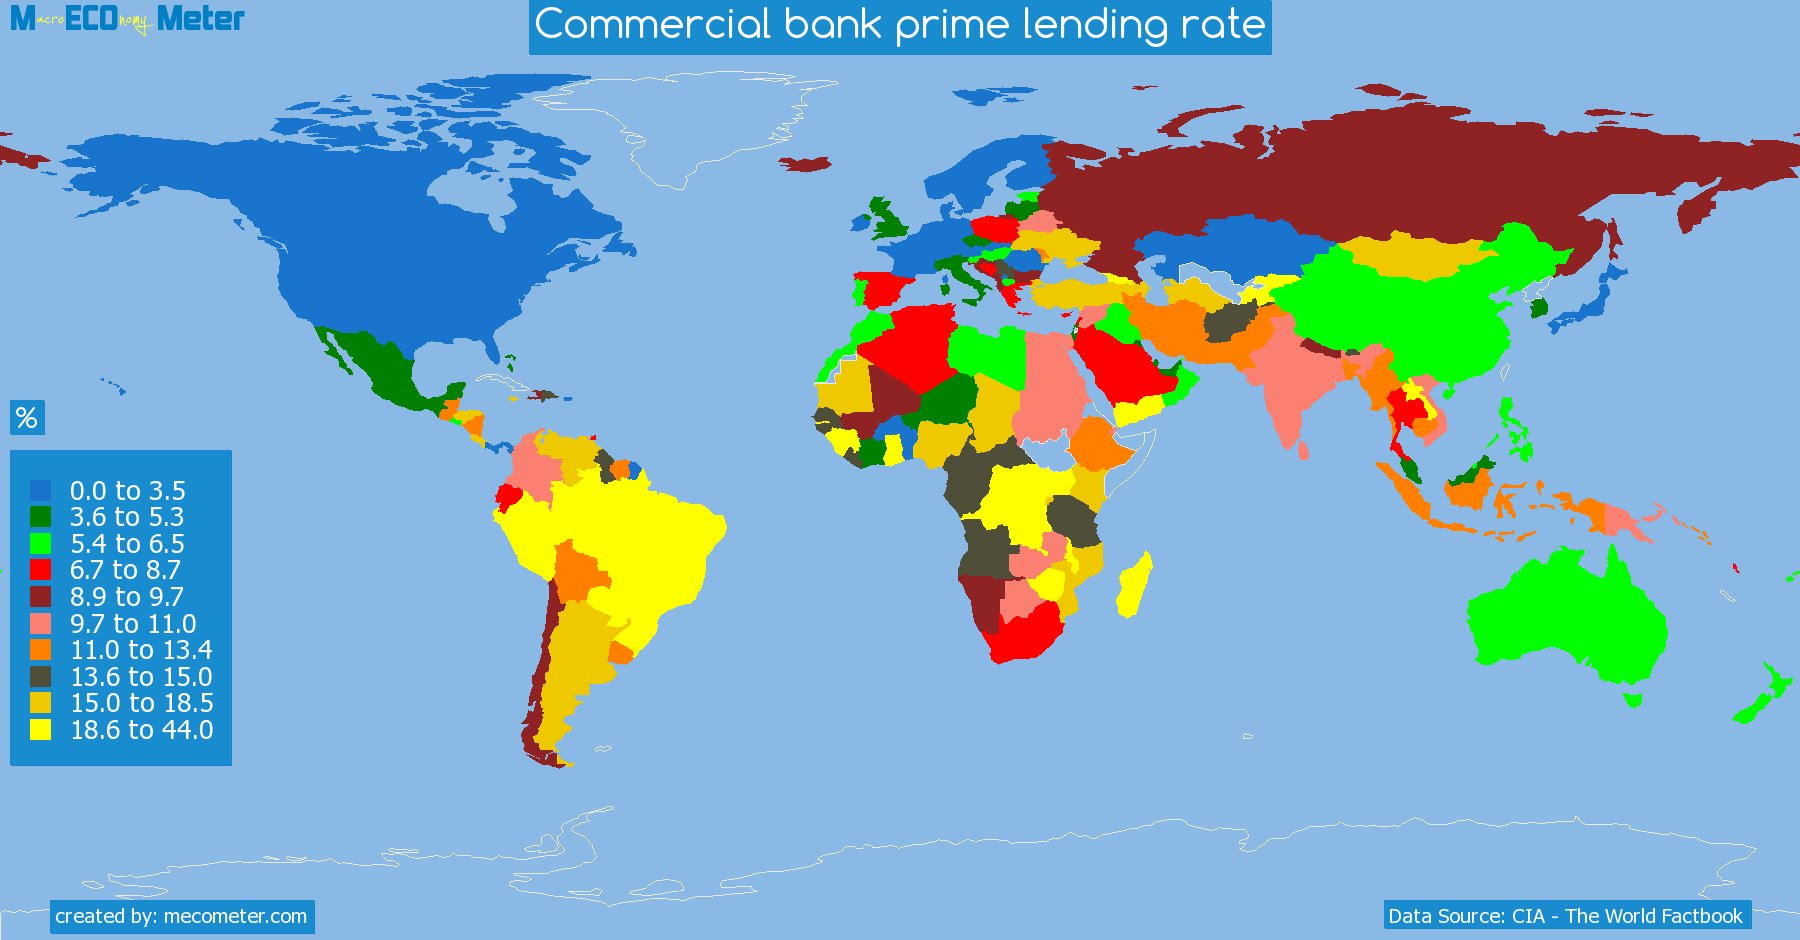 list of countries by Commercial bank prime lending rate